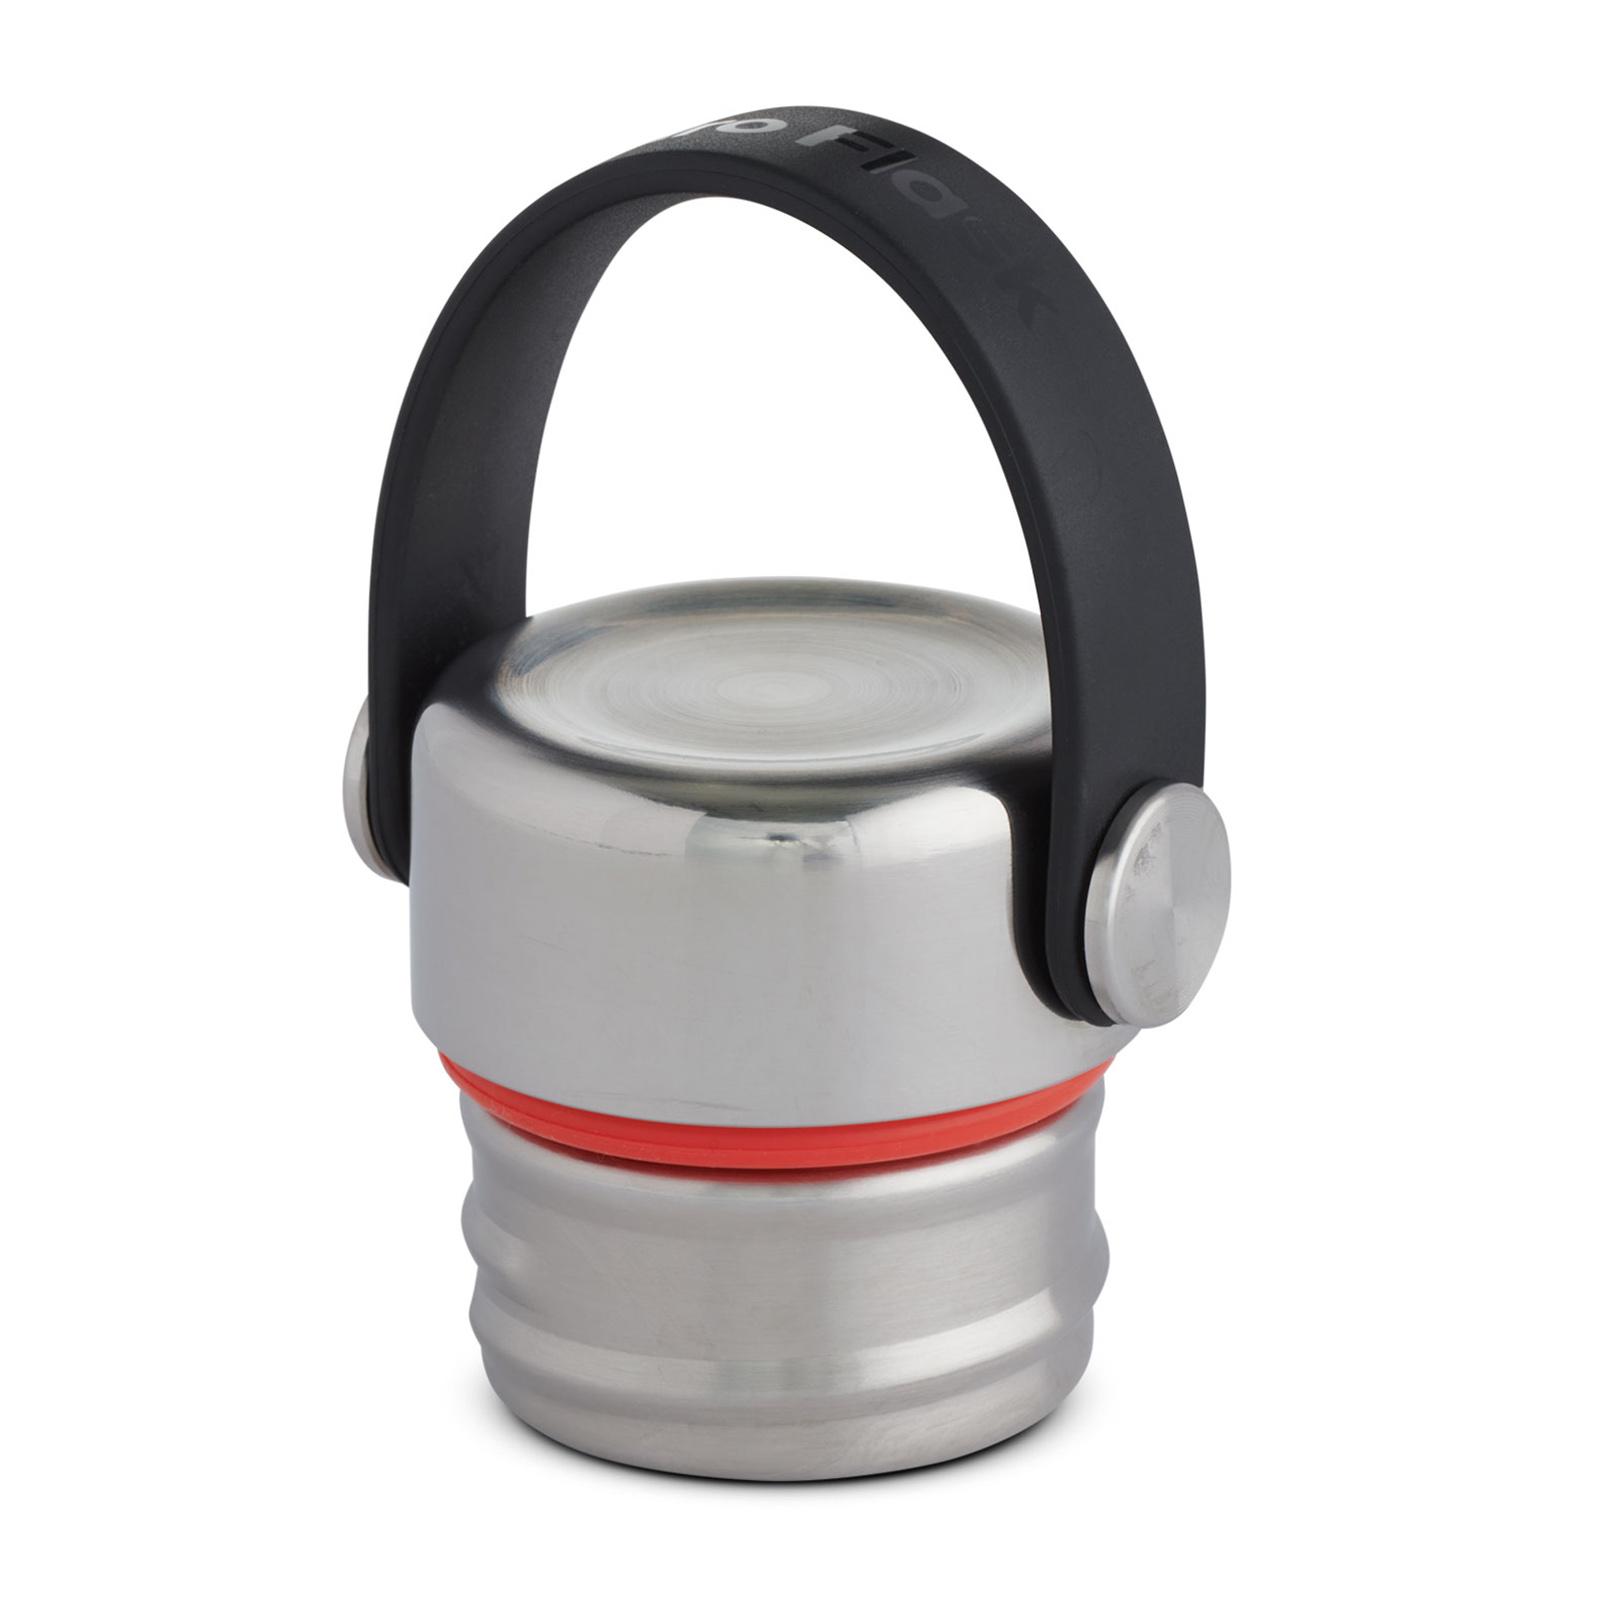 Hydro Flask Standard Stainless Steel Cap image01